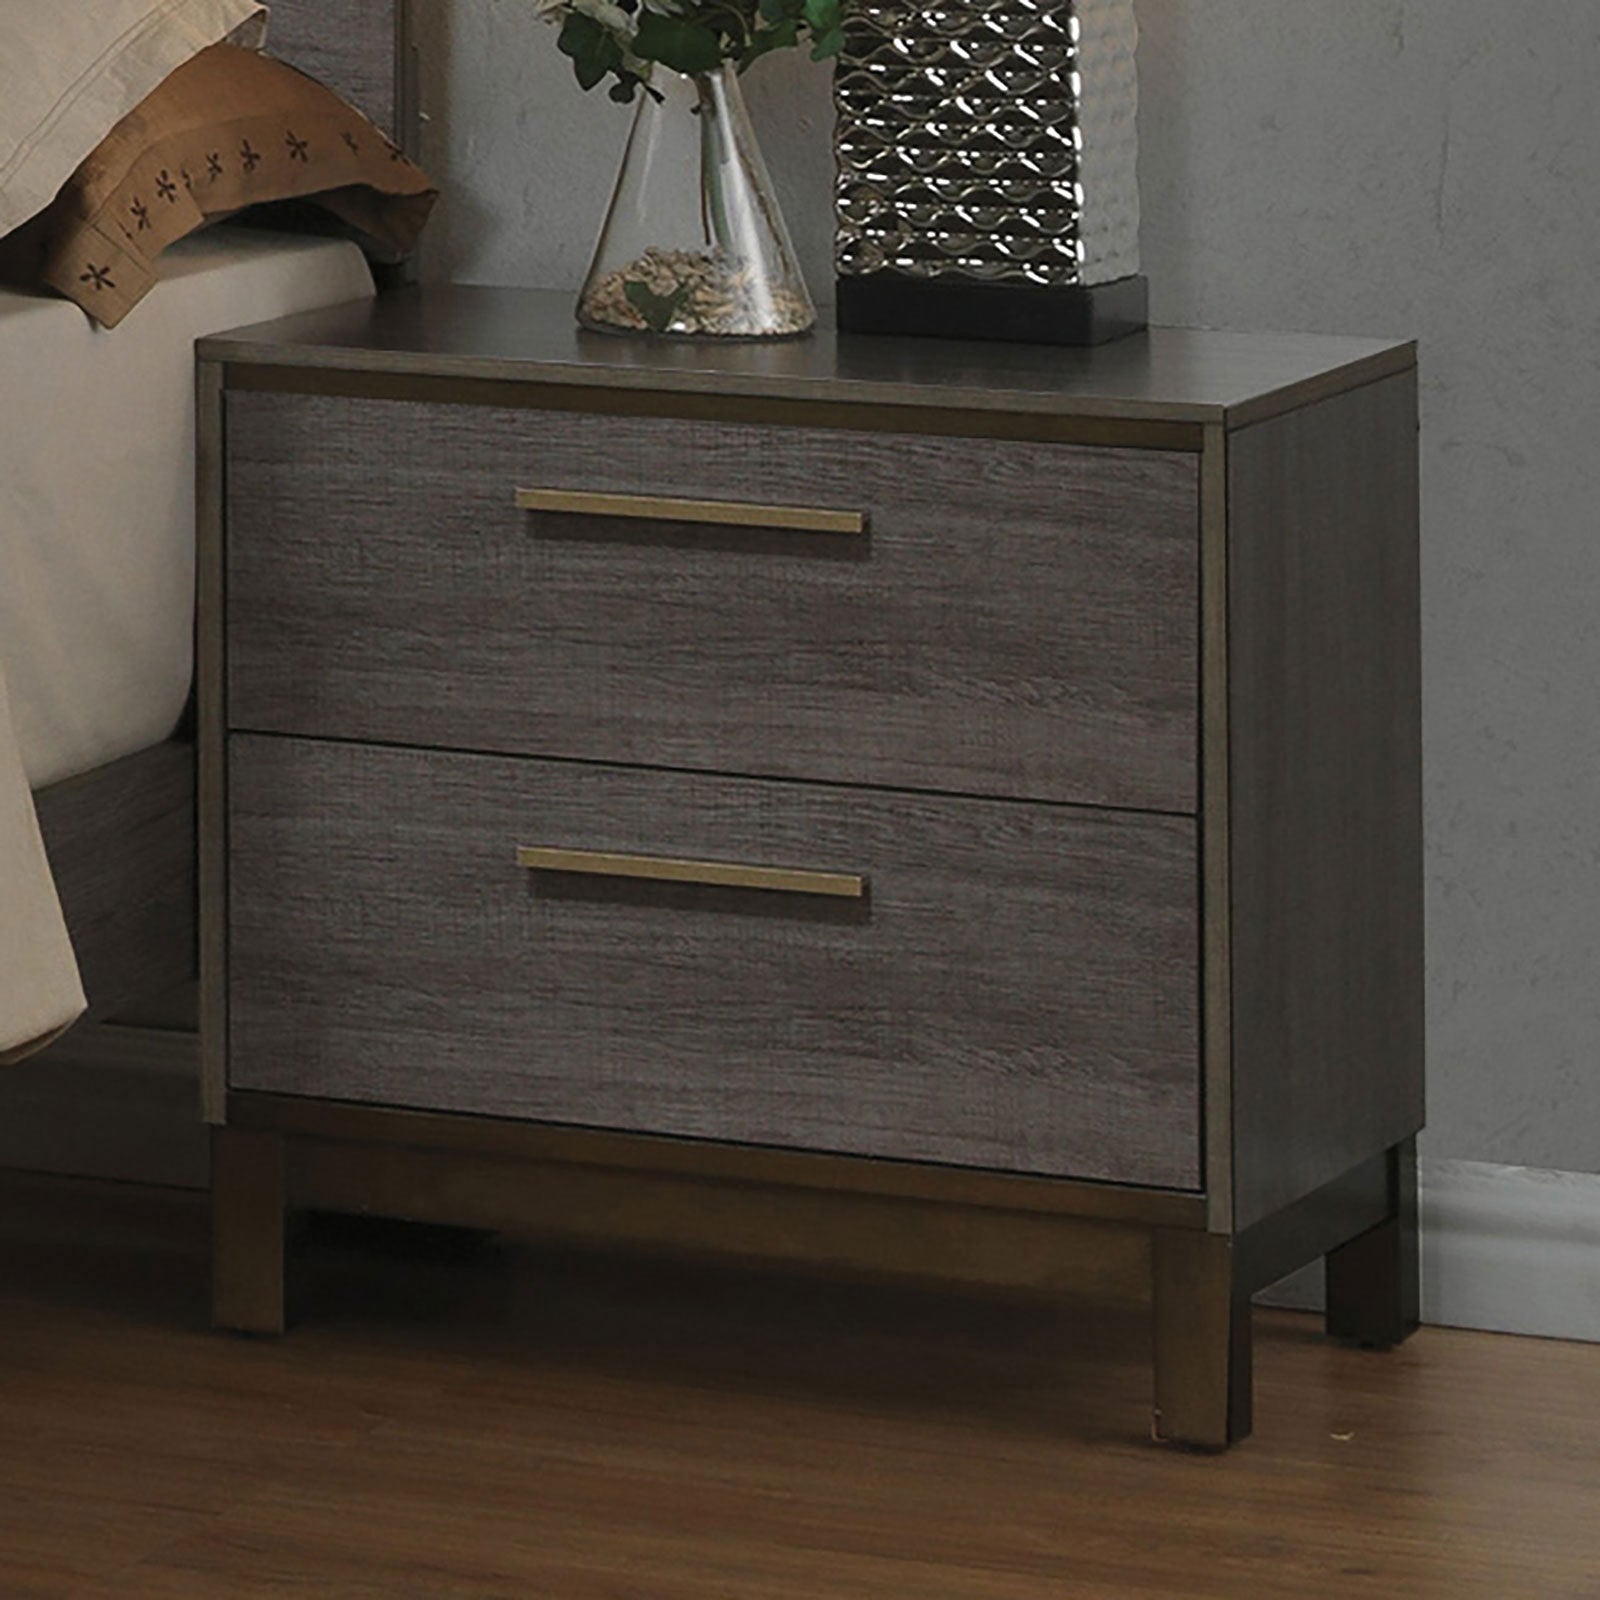 Contemporary Two Tone Antique Gray Nightstand with Center Metal Glides Brass Bar Pulls